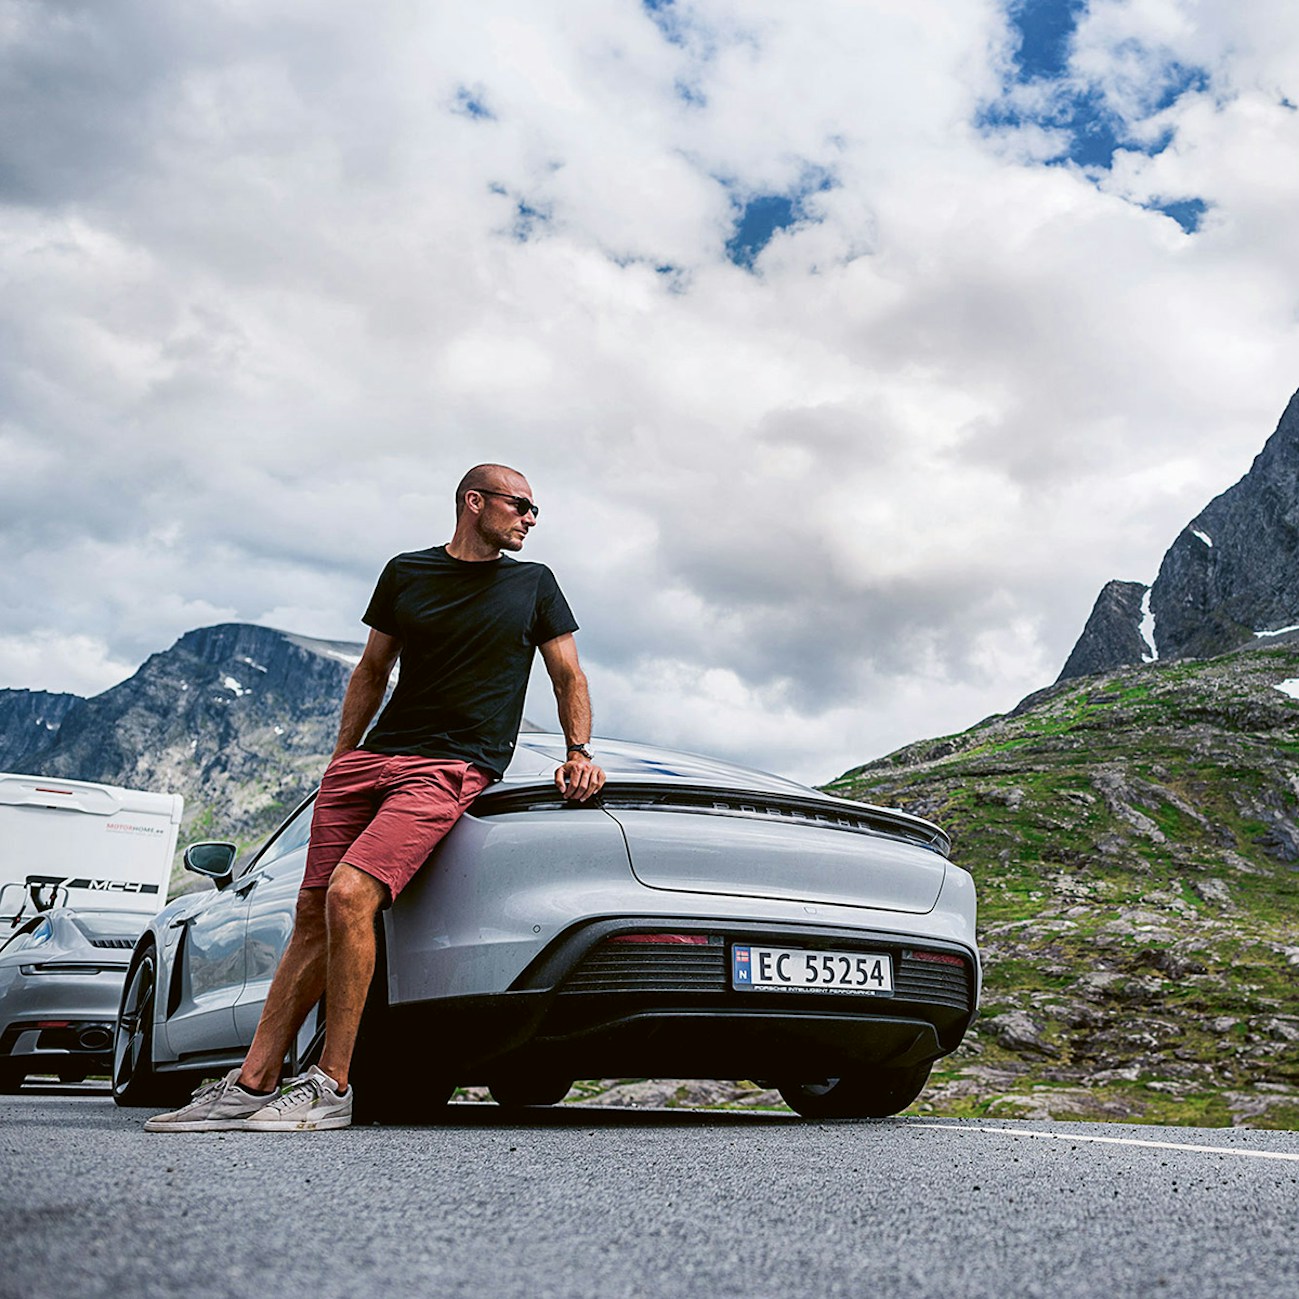 A man leans against a Porsche parked on the side of a road with snowy mountains in the background.